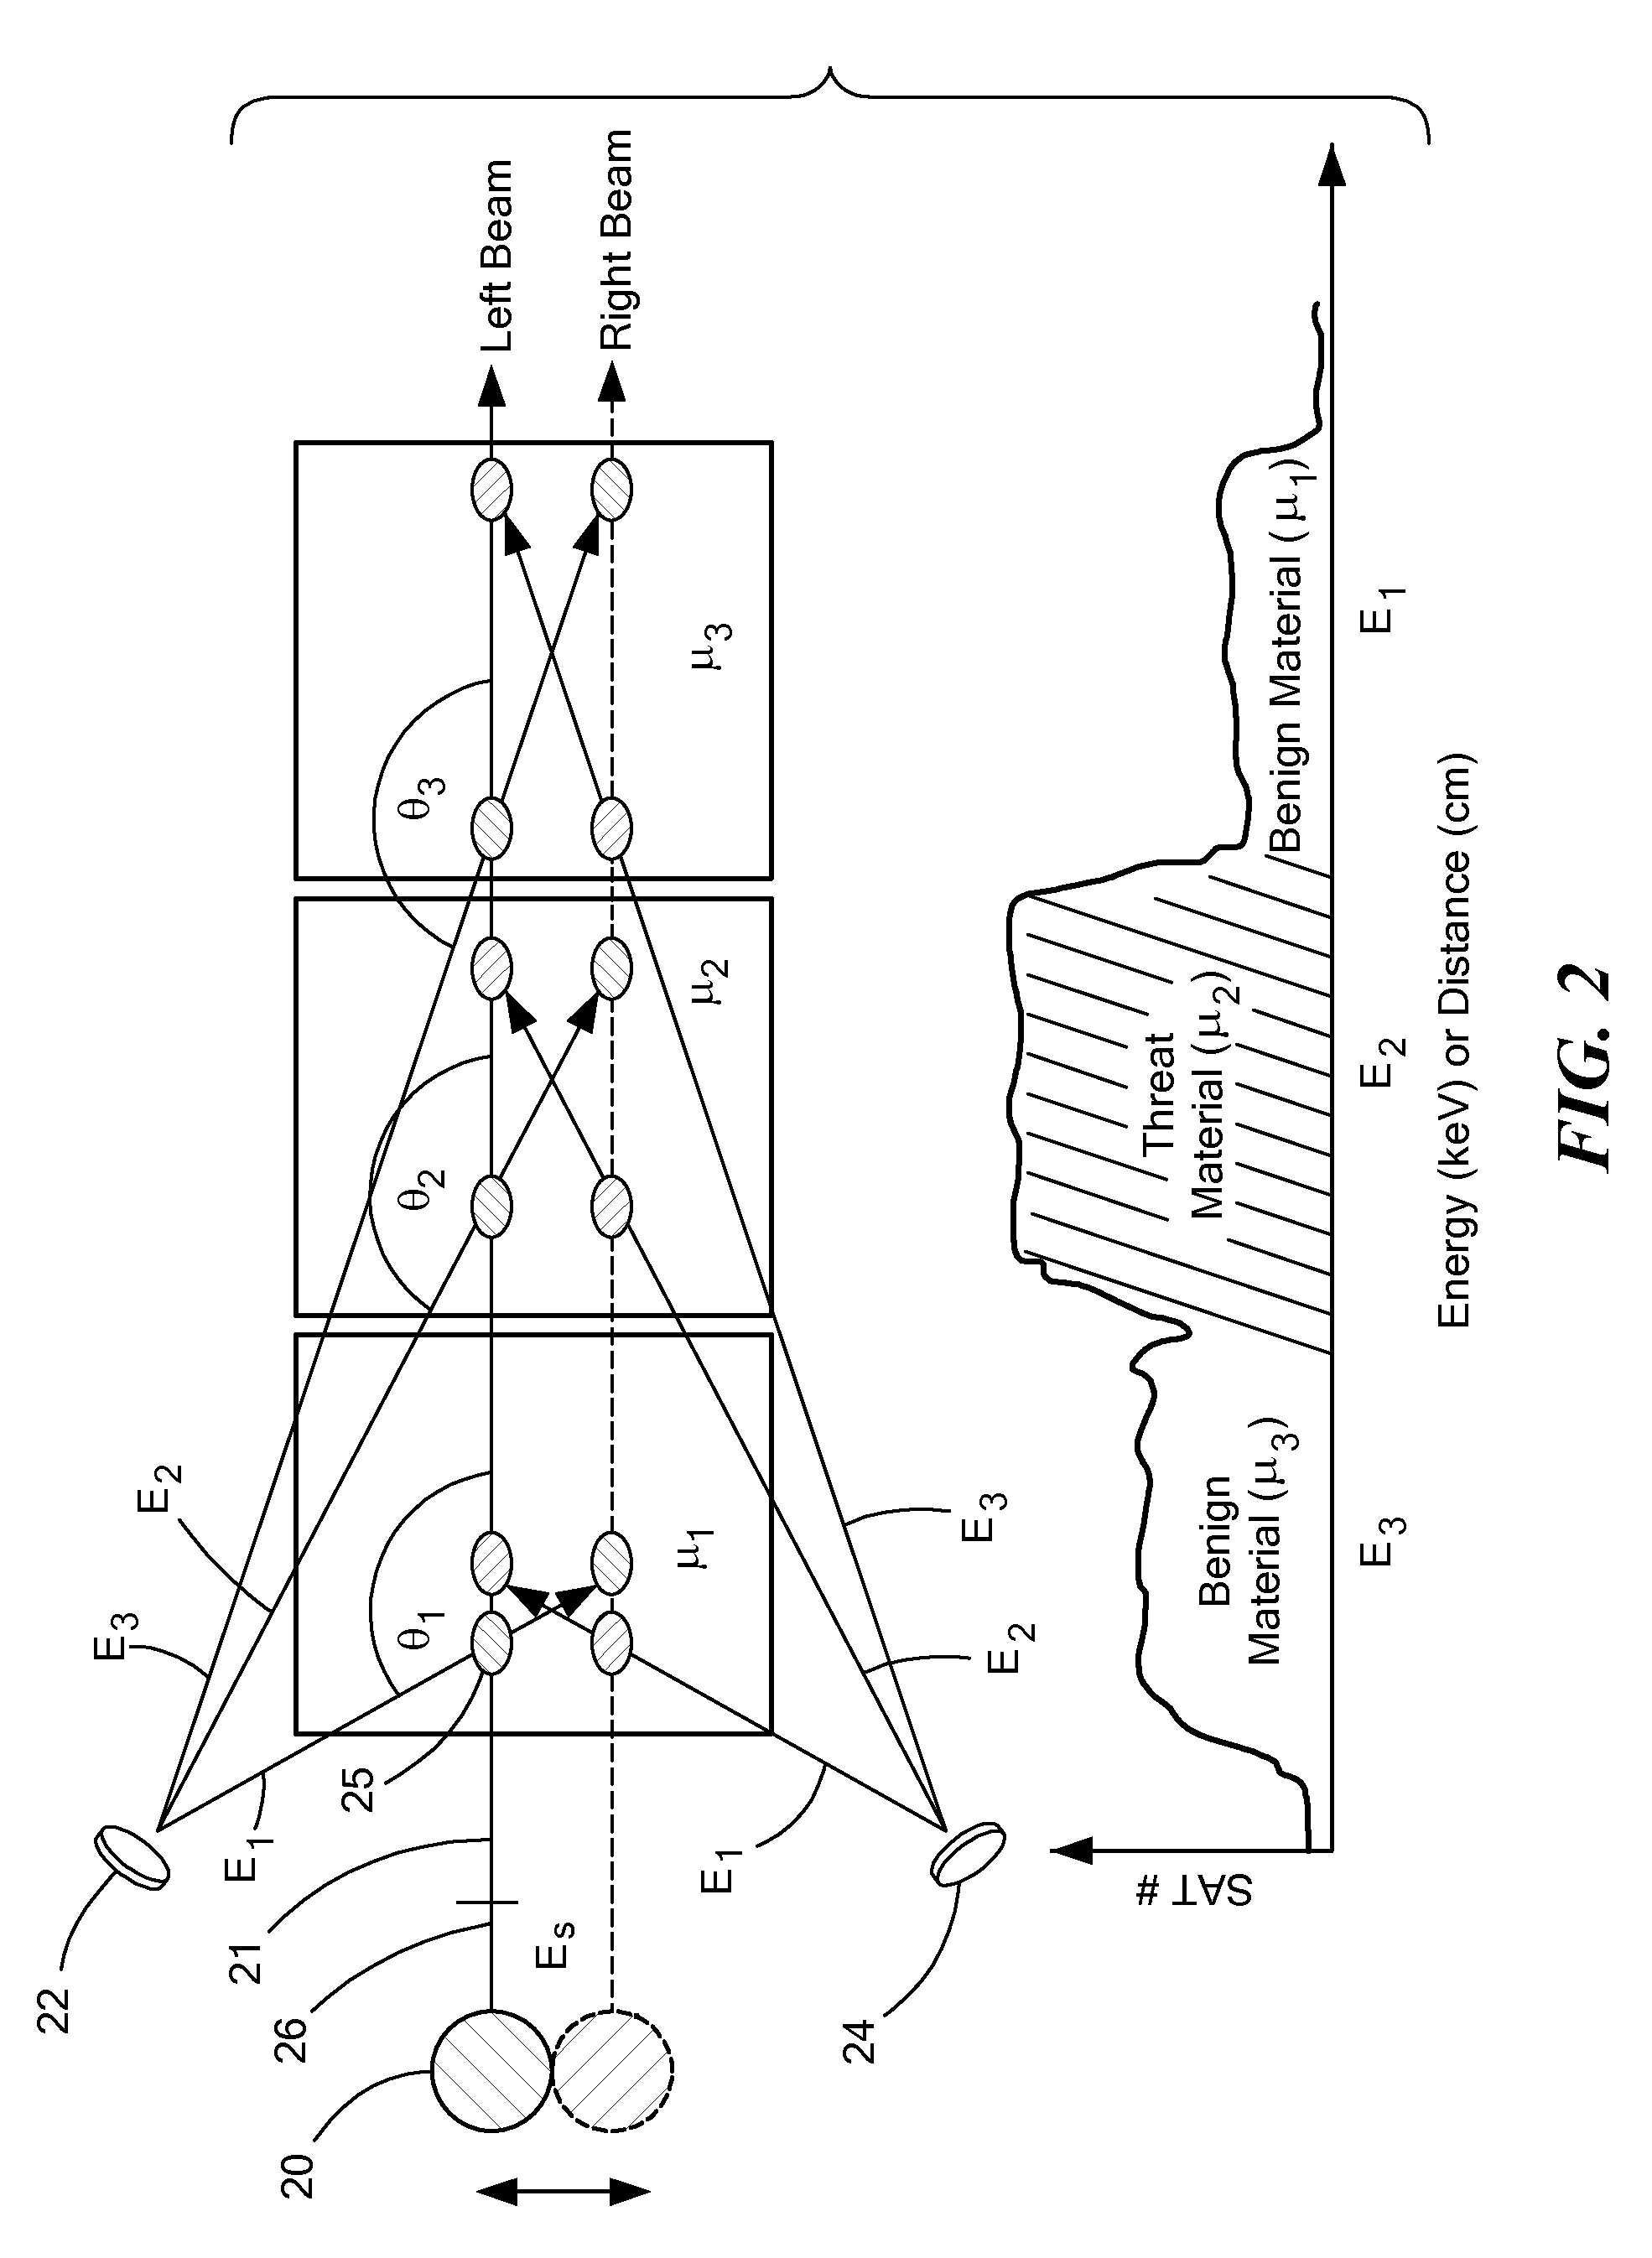 Scatter attenuation tomography using a monochromatic radiation source